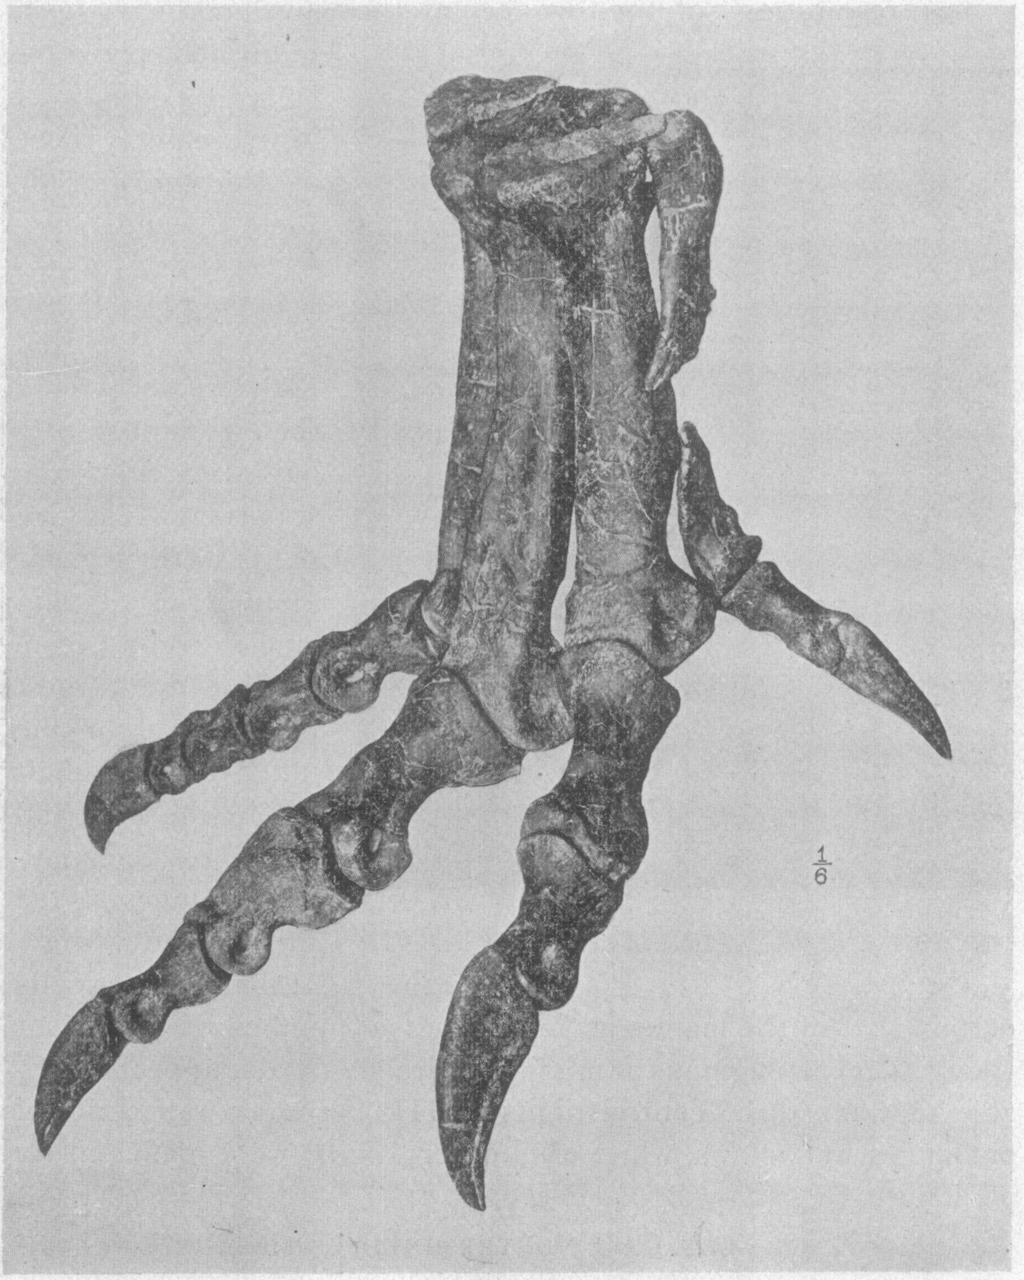 I 899.] Osbor-, Ctarnivorous,.aud Herbivorous Dinosaurs. I67 saurus type. All of the bones of the lower leg and pes belong to one individual, excepting the terminal claws I and II.